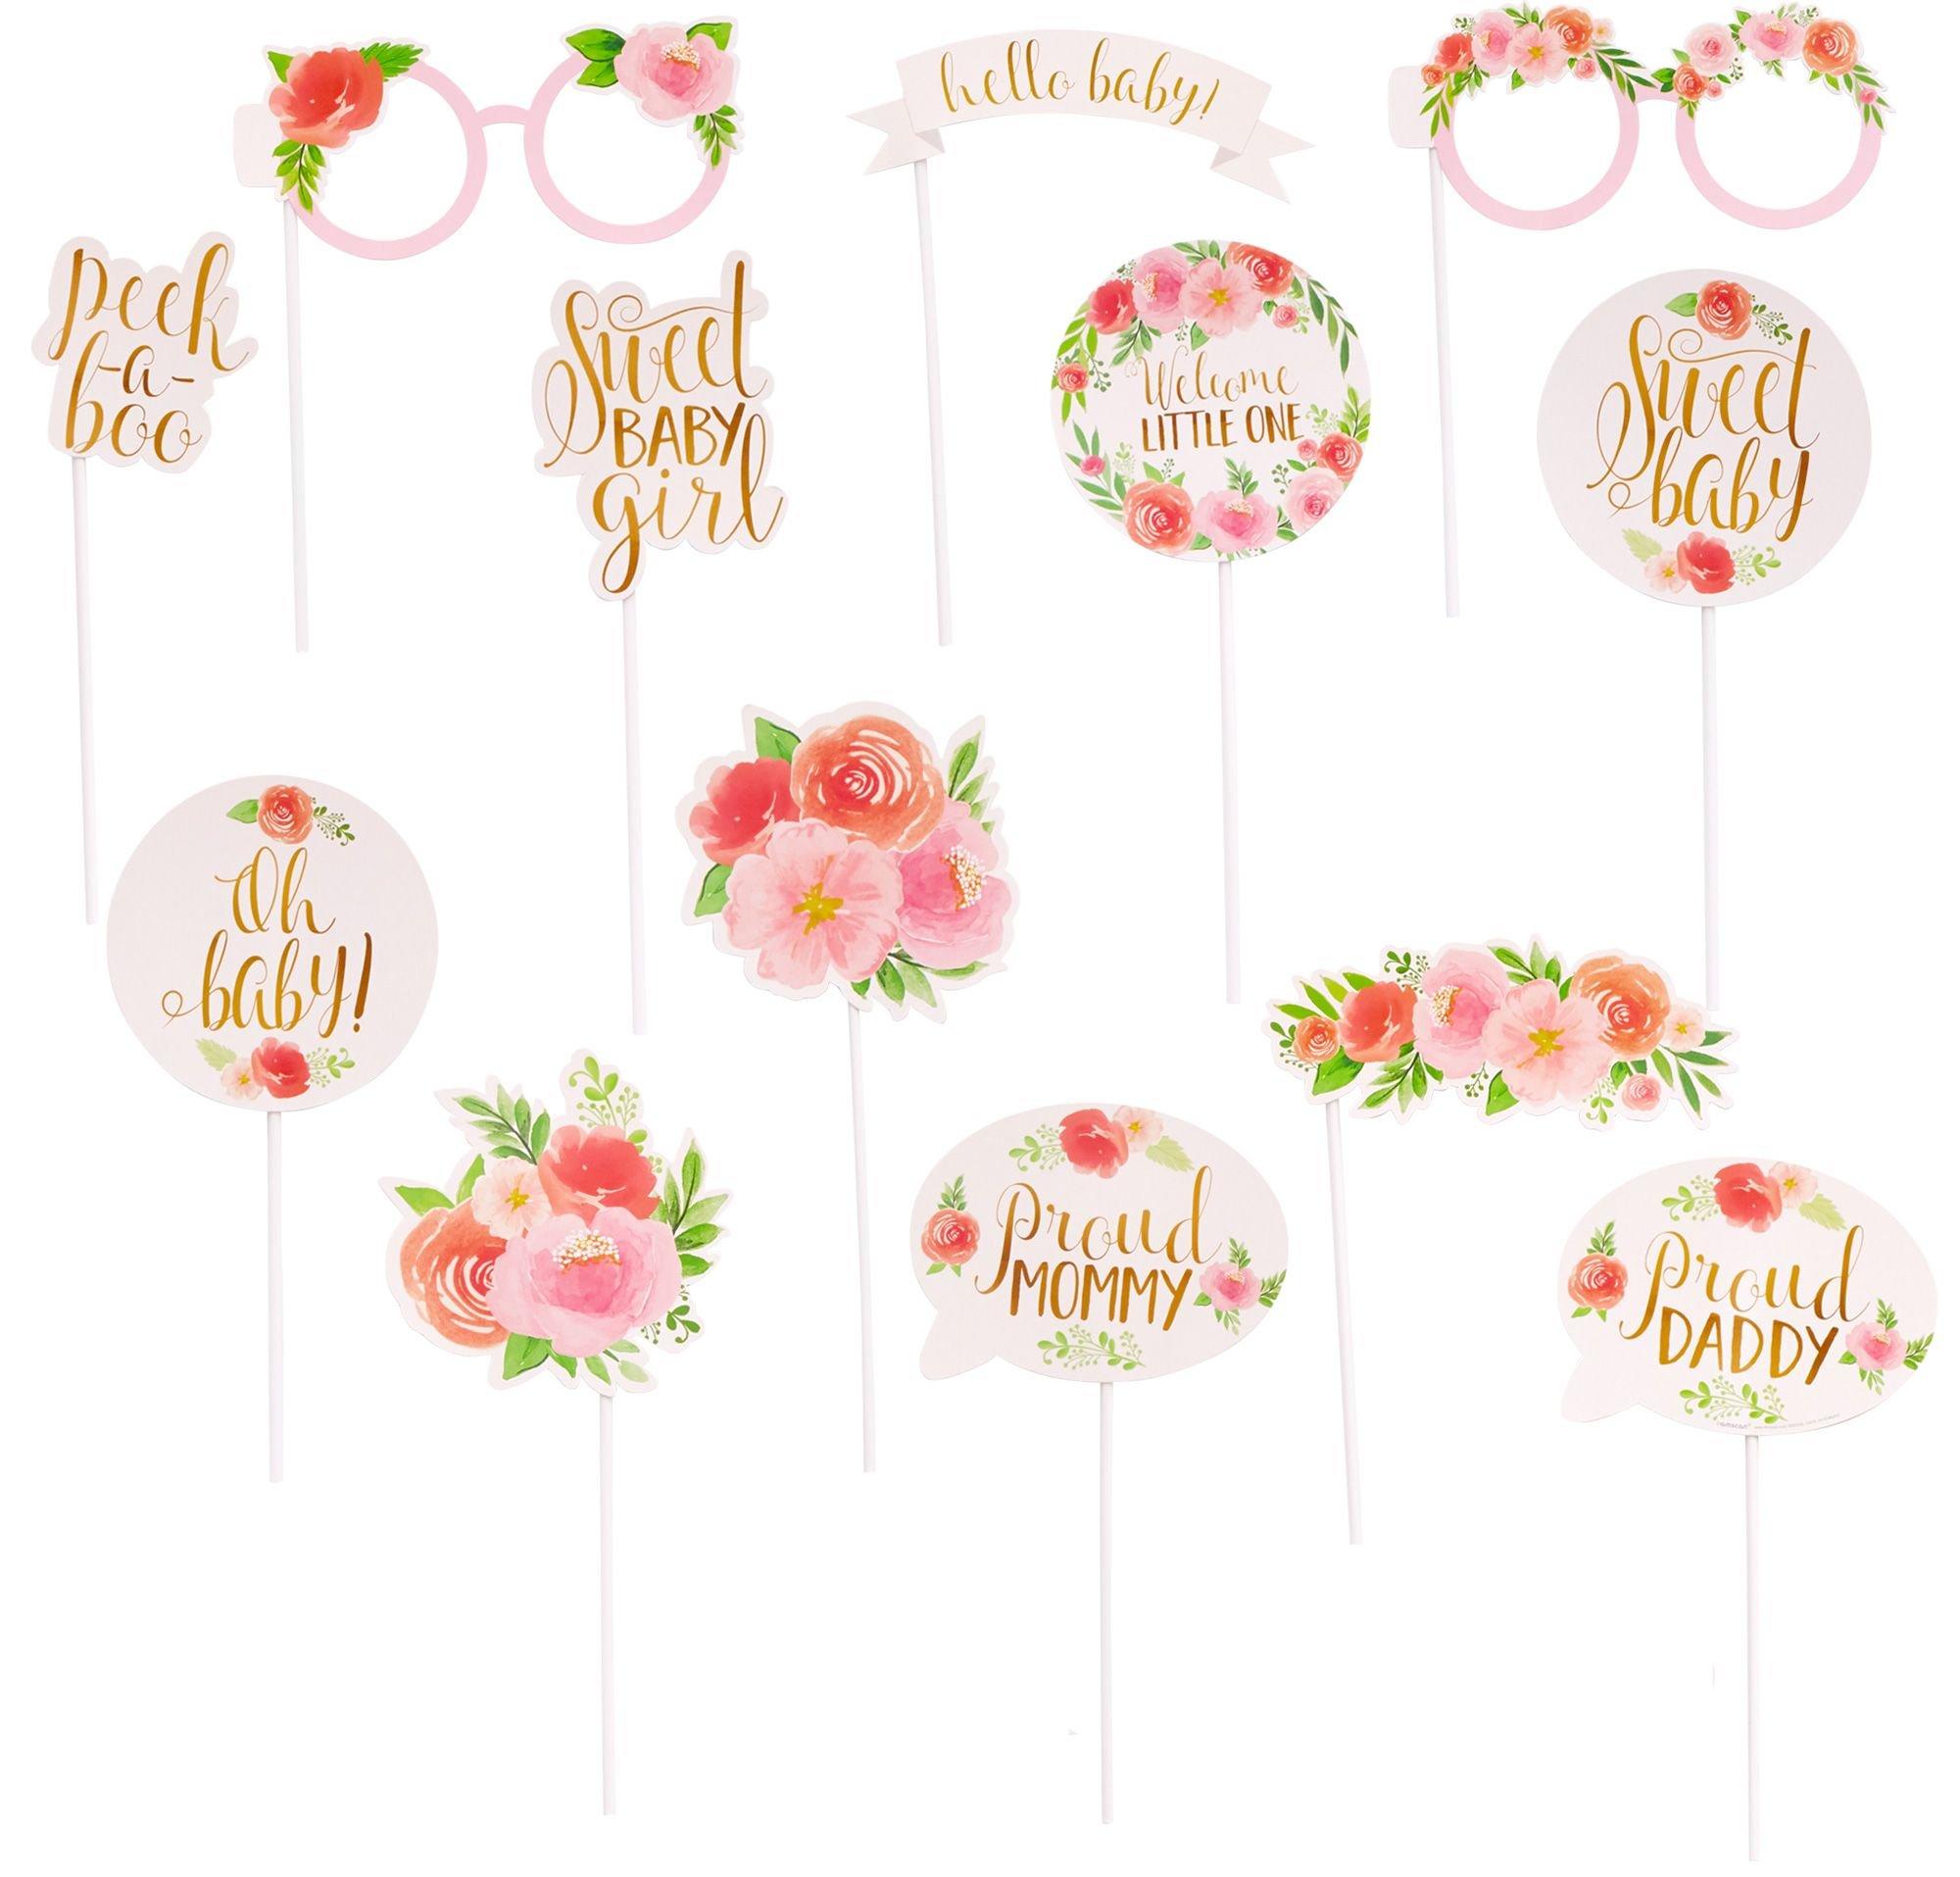 Floral Baby Photo Booth Props 13ct